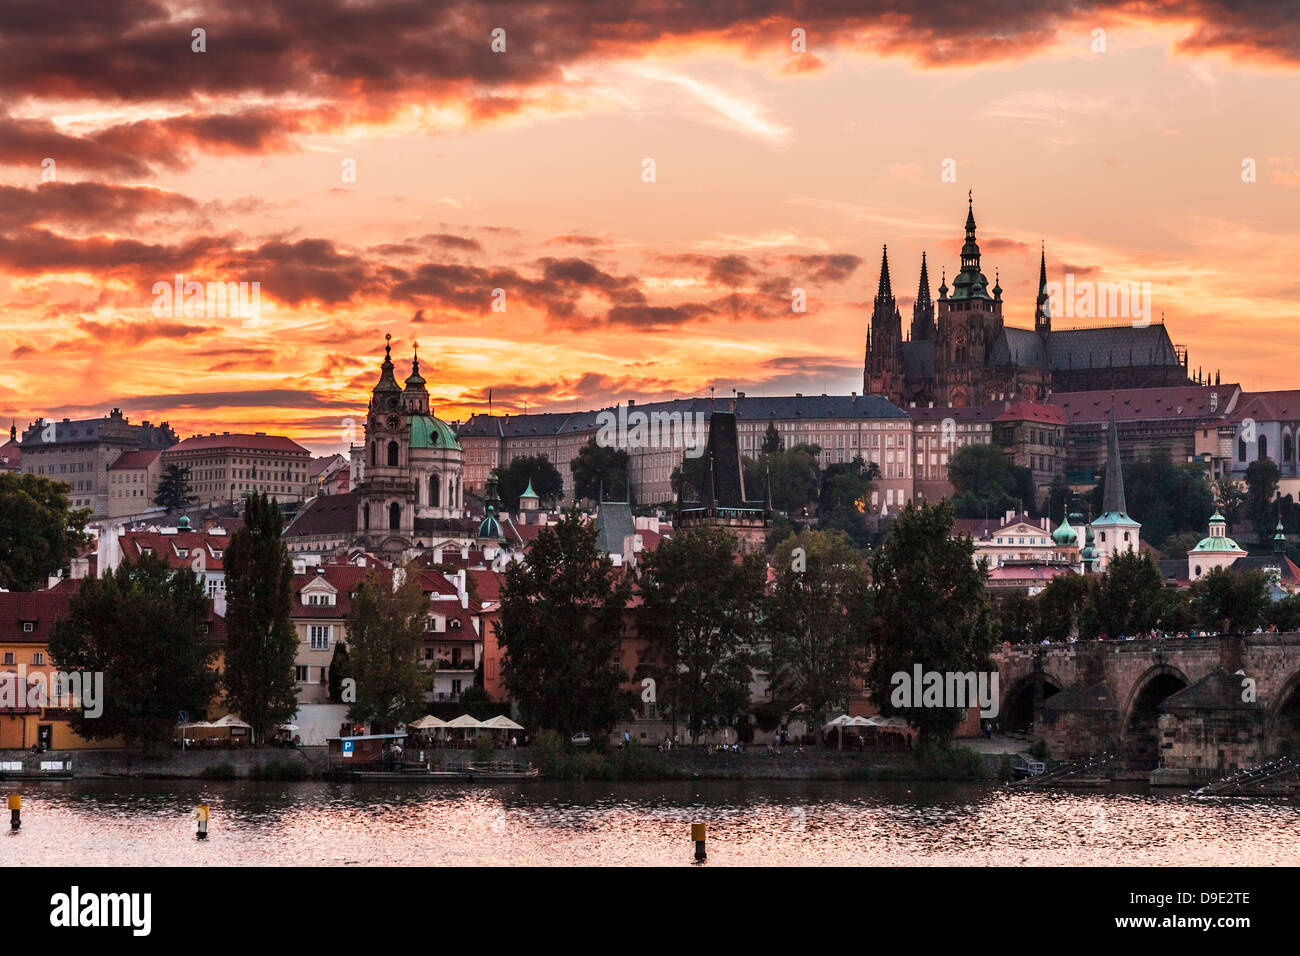 A fiery sunset over the River Vltava, the Castle, St Vitus Cathedral and Charles Bridge in Prague, Czech Republic. Stock Photo